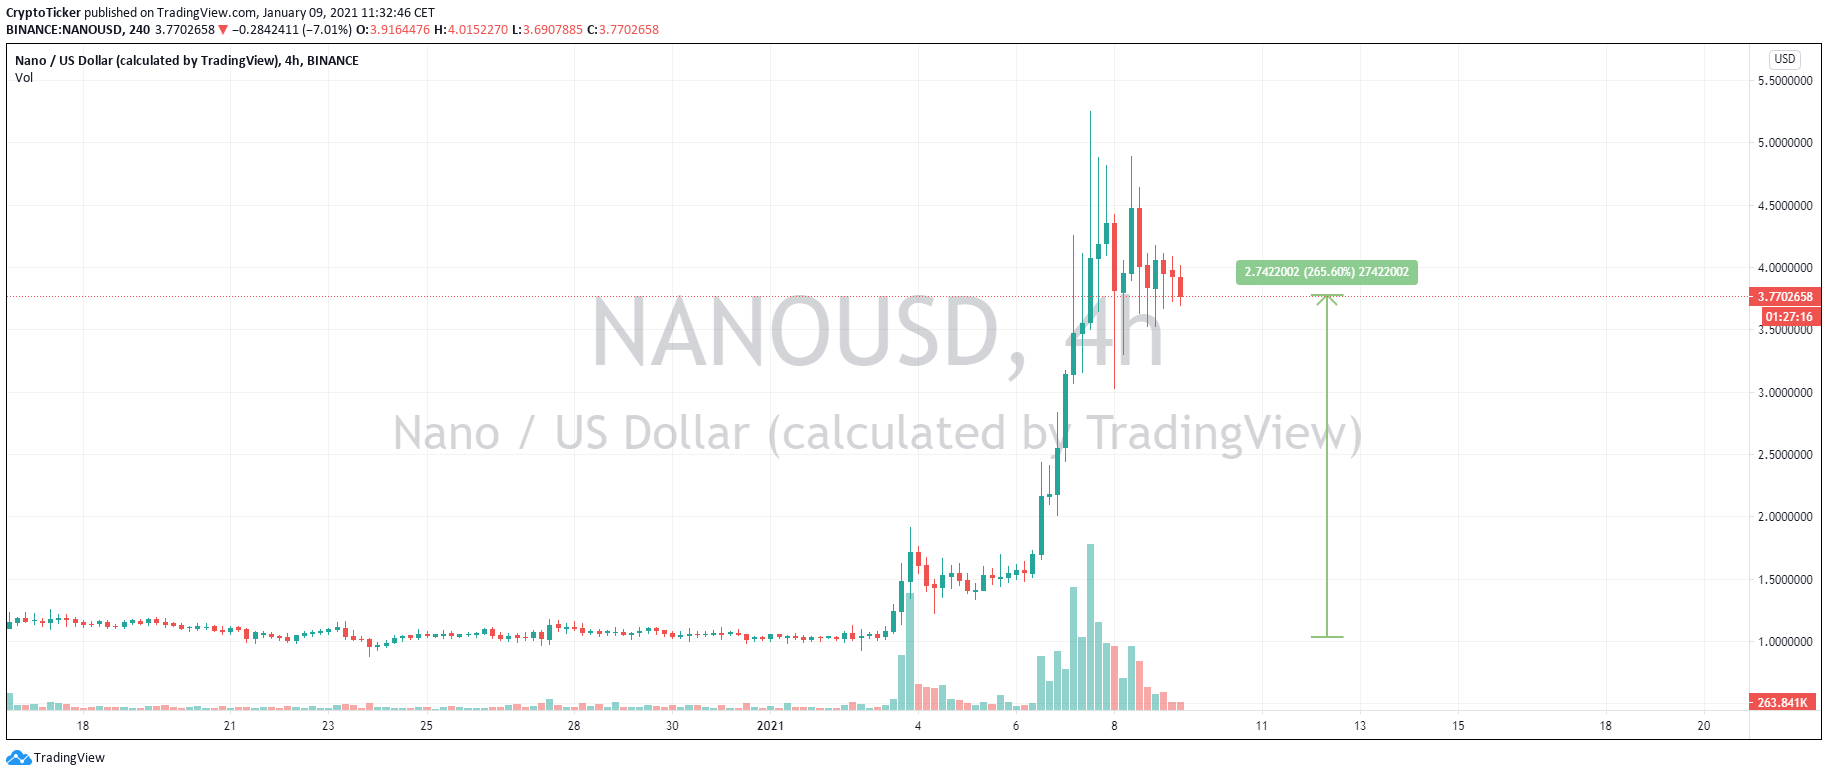 NANO/USD 4-hour chart showing the rise significant rise in the past 7 days 